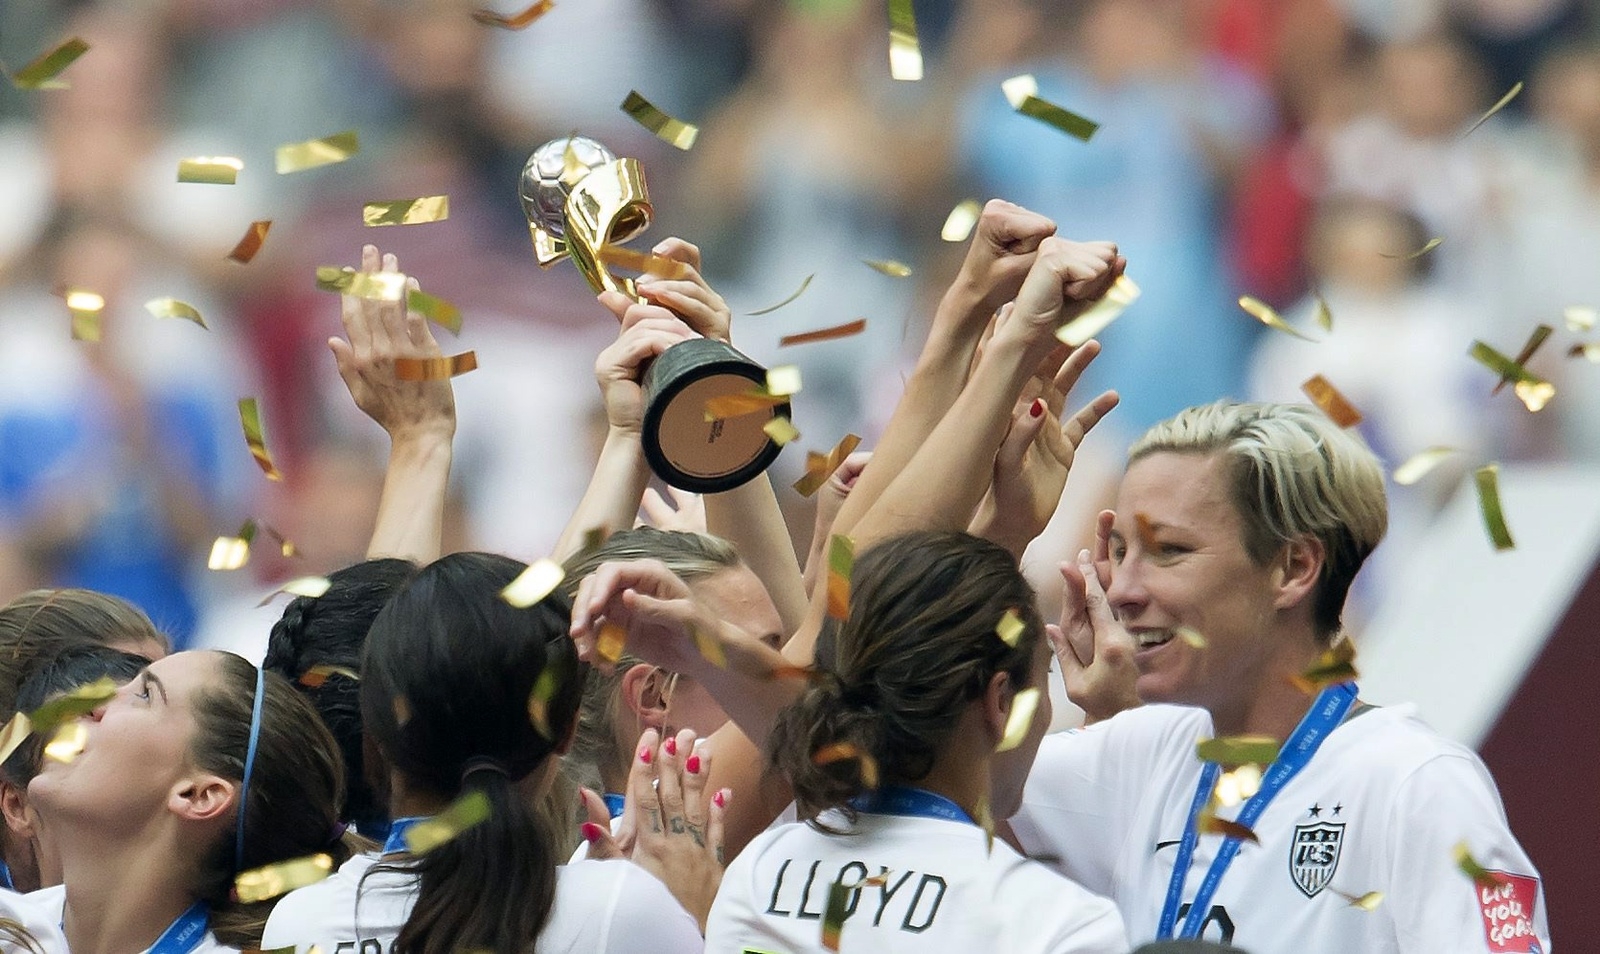 United States' Carli Lloyd and Abby Wambach, right, embrace as the team celebrates their win over Japan following the second half of the FIFA Women's World Cup soccer championship in Vancouver, British Columbia, Canada, Sunday, July 5, 2015.   (Jonathan Hayward/The Canadian Press via AP) MANDATORY CREDIT